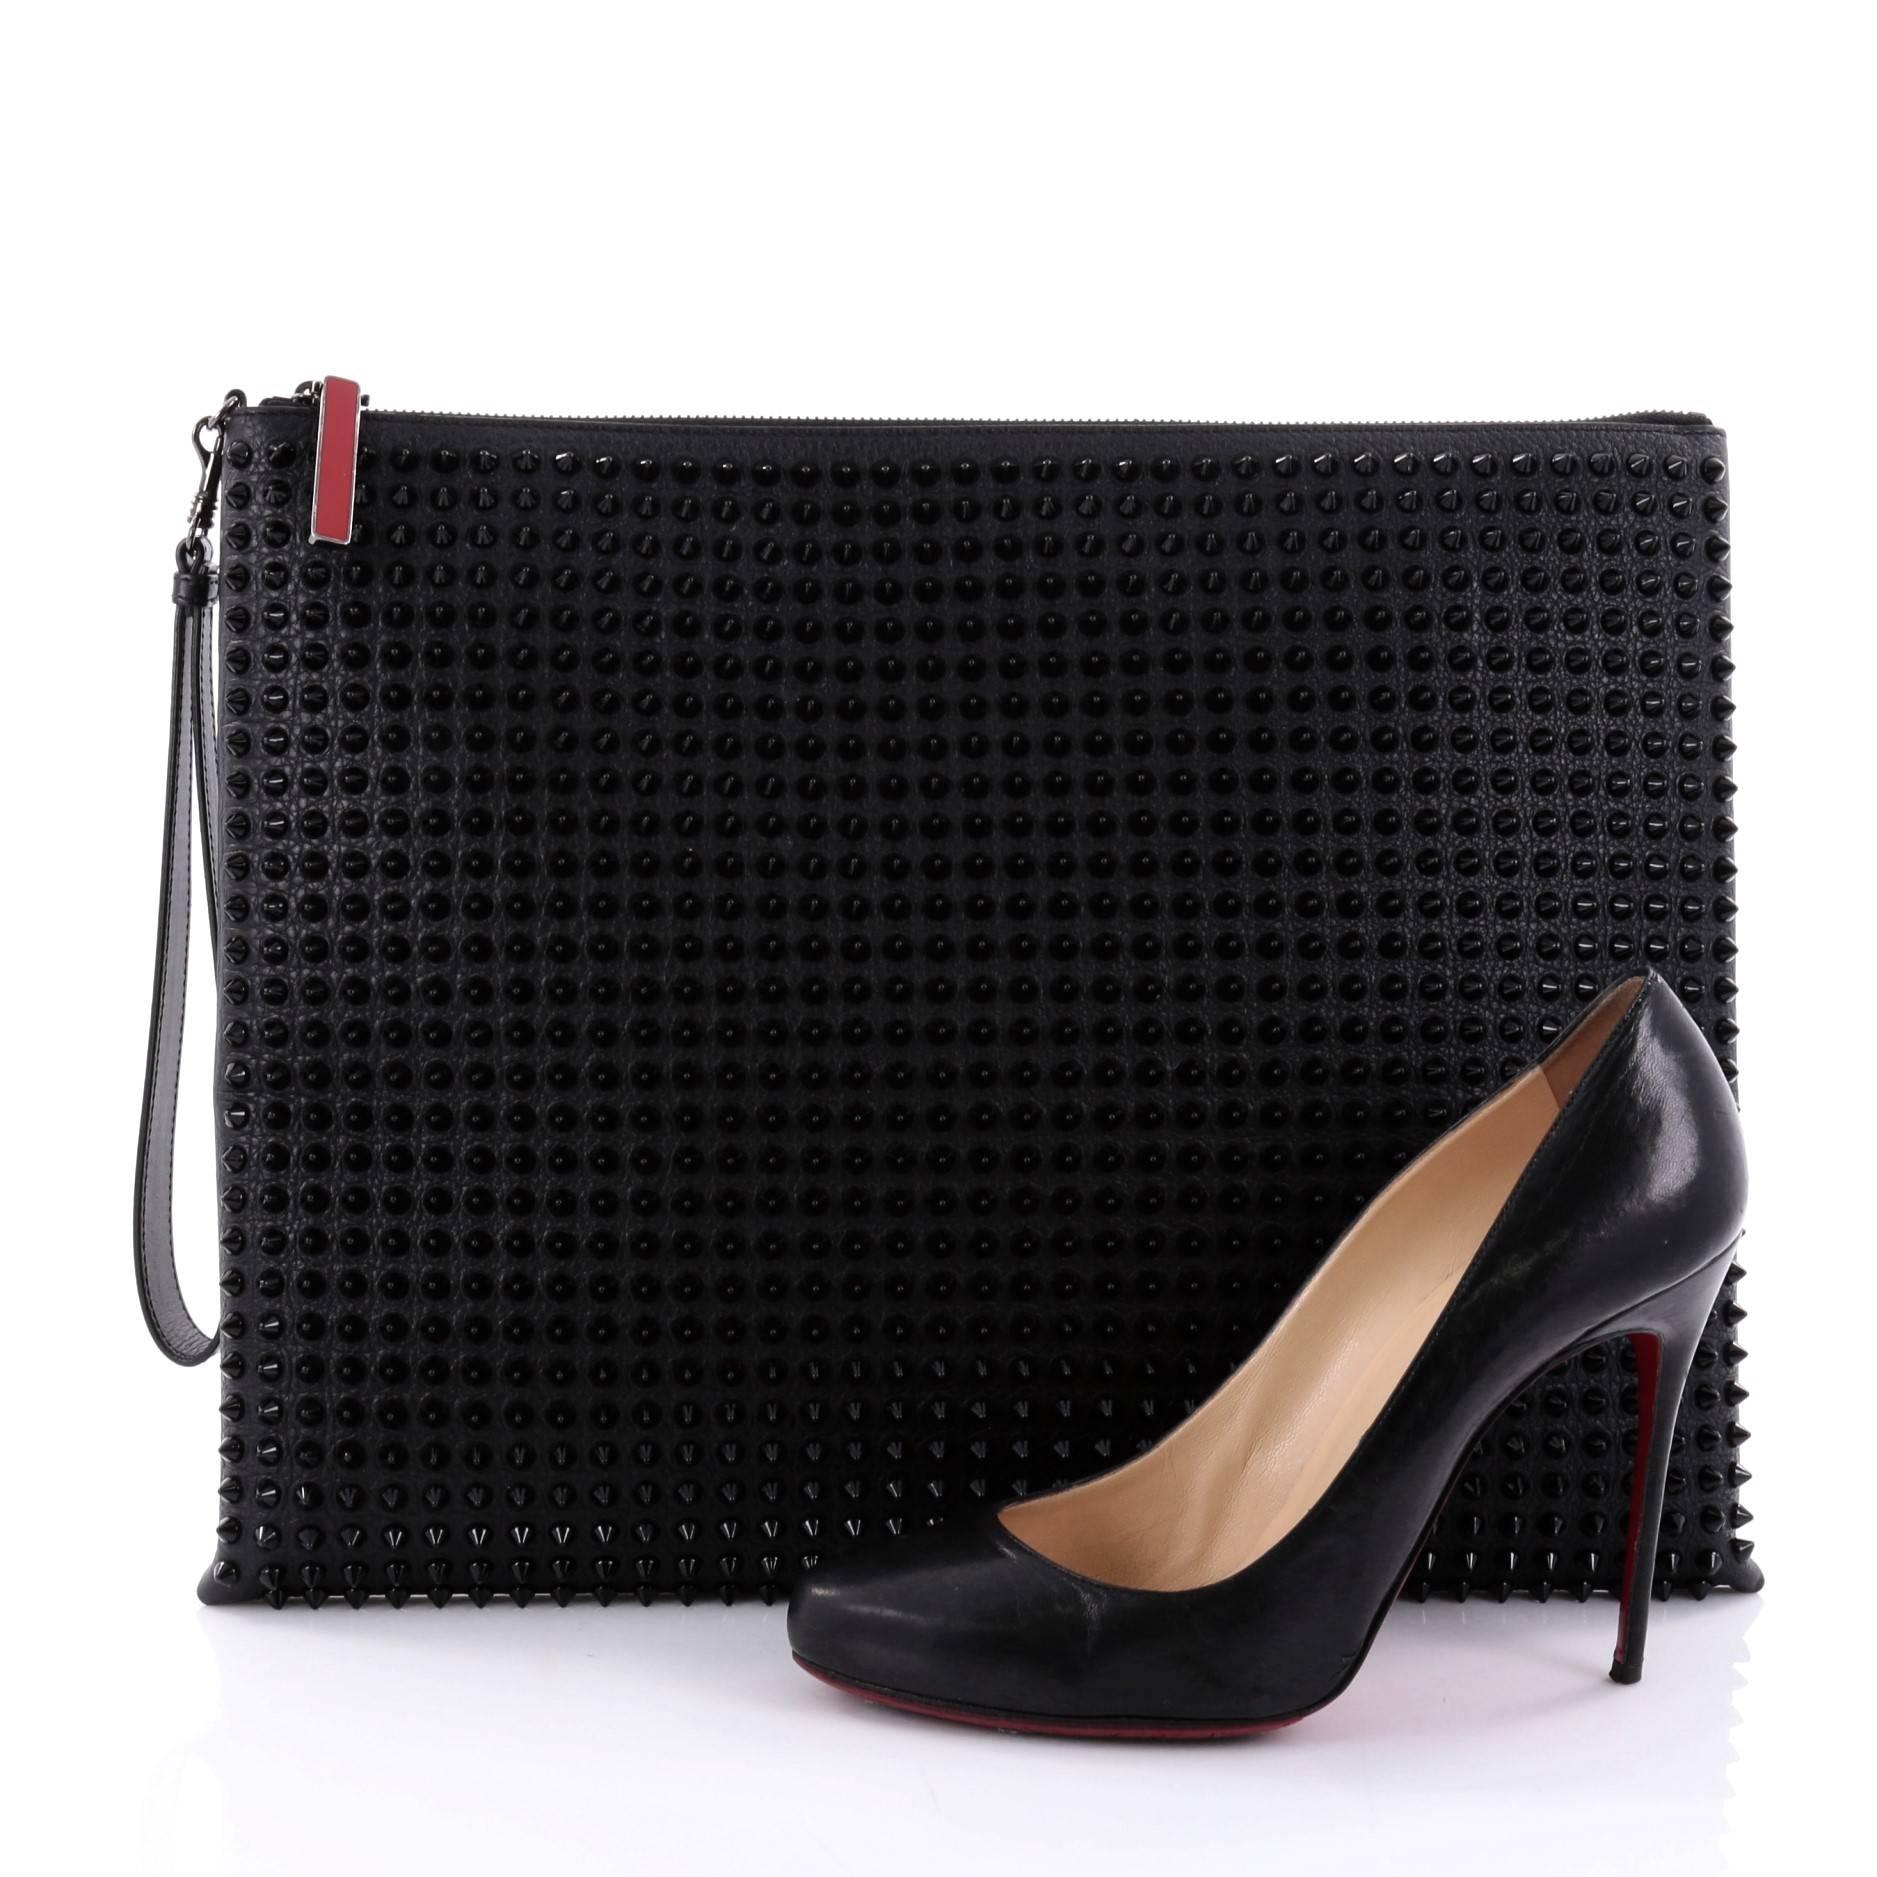 This authentic Christian Louboutin Peter Pouch Spiked Leather Medium is a multifunctional pouch perfect for chic fashionista on the go. Crafted in black spiked leather, this chic pouch features a wristlet strap, exterior back zip pocket, and aged